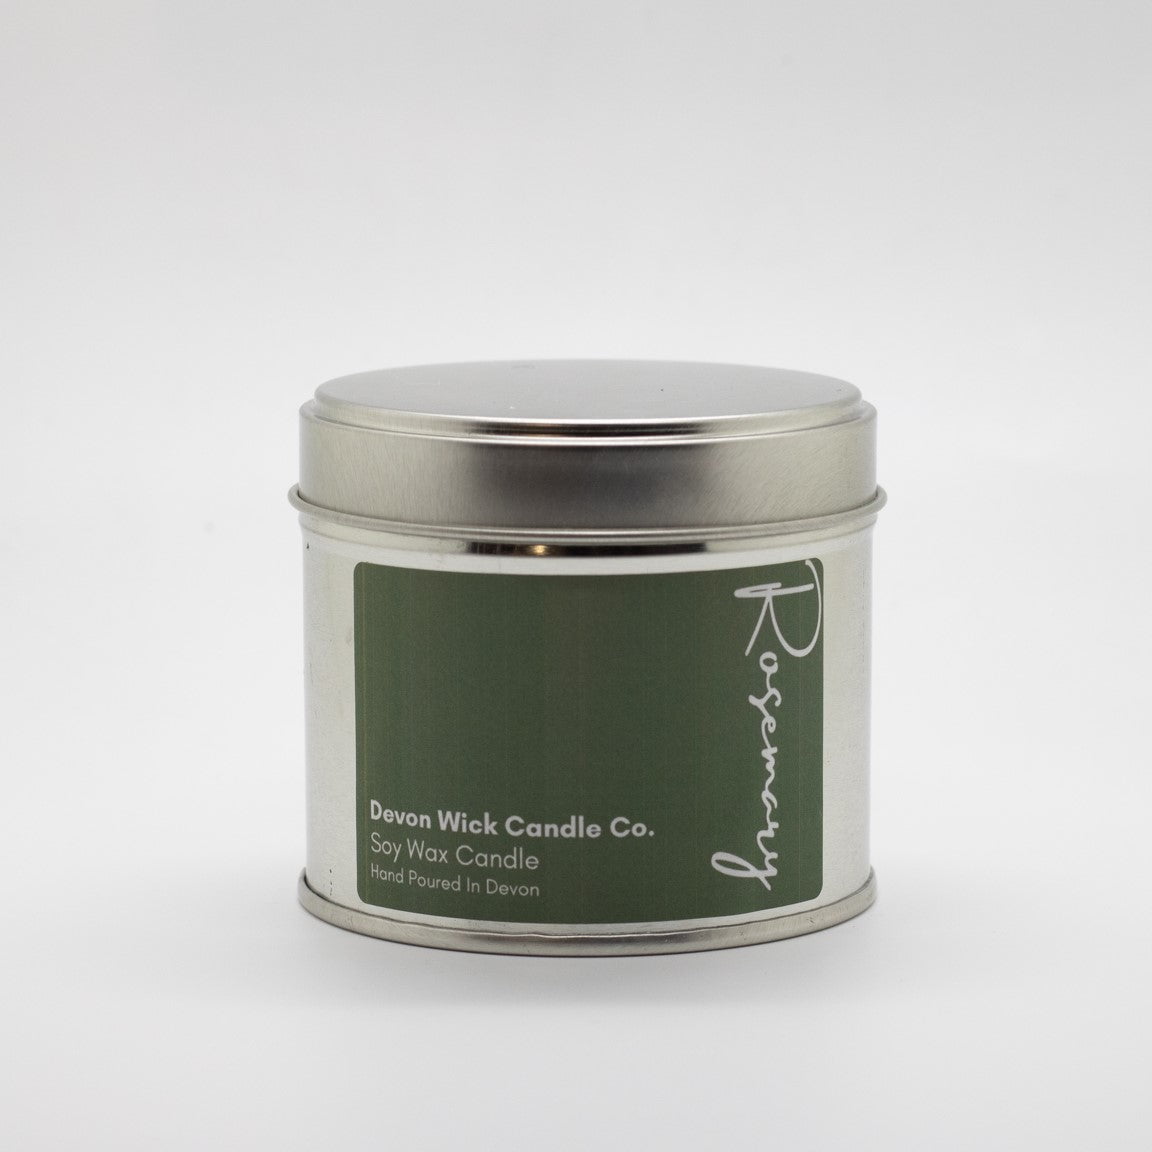 Devon Wick Candle Co. Limited Rosemary Soy Wax Tinned Candle